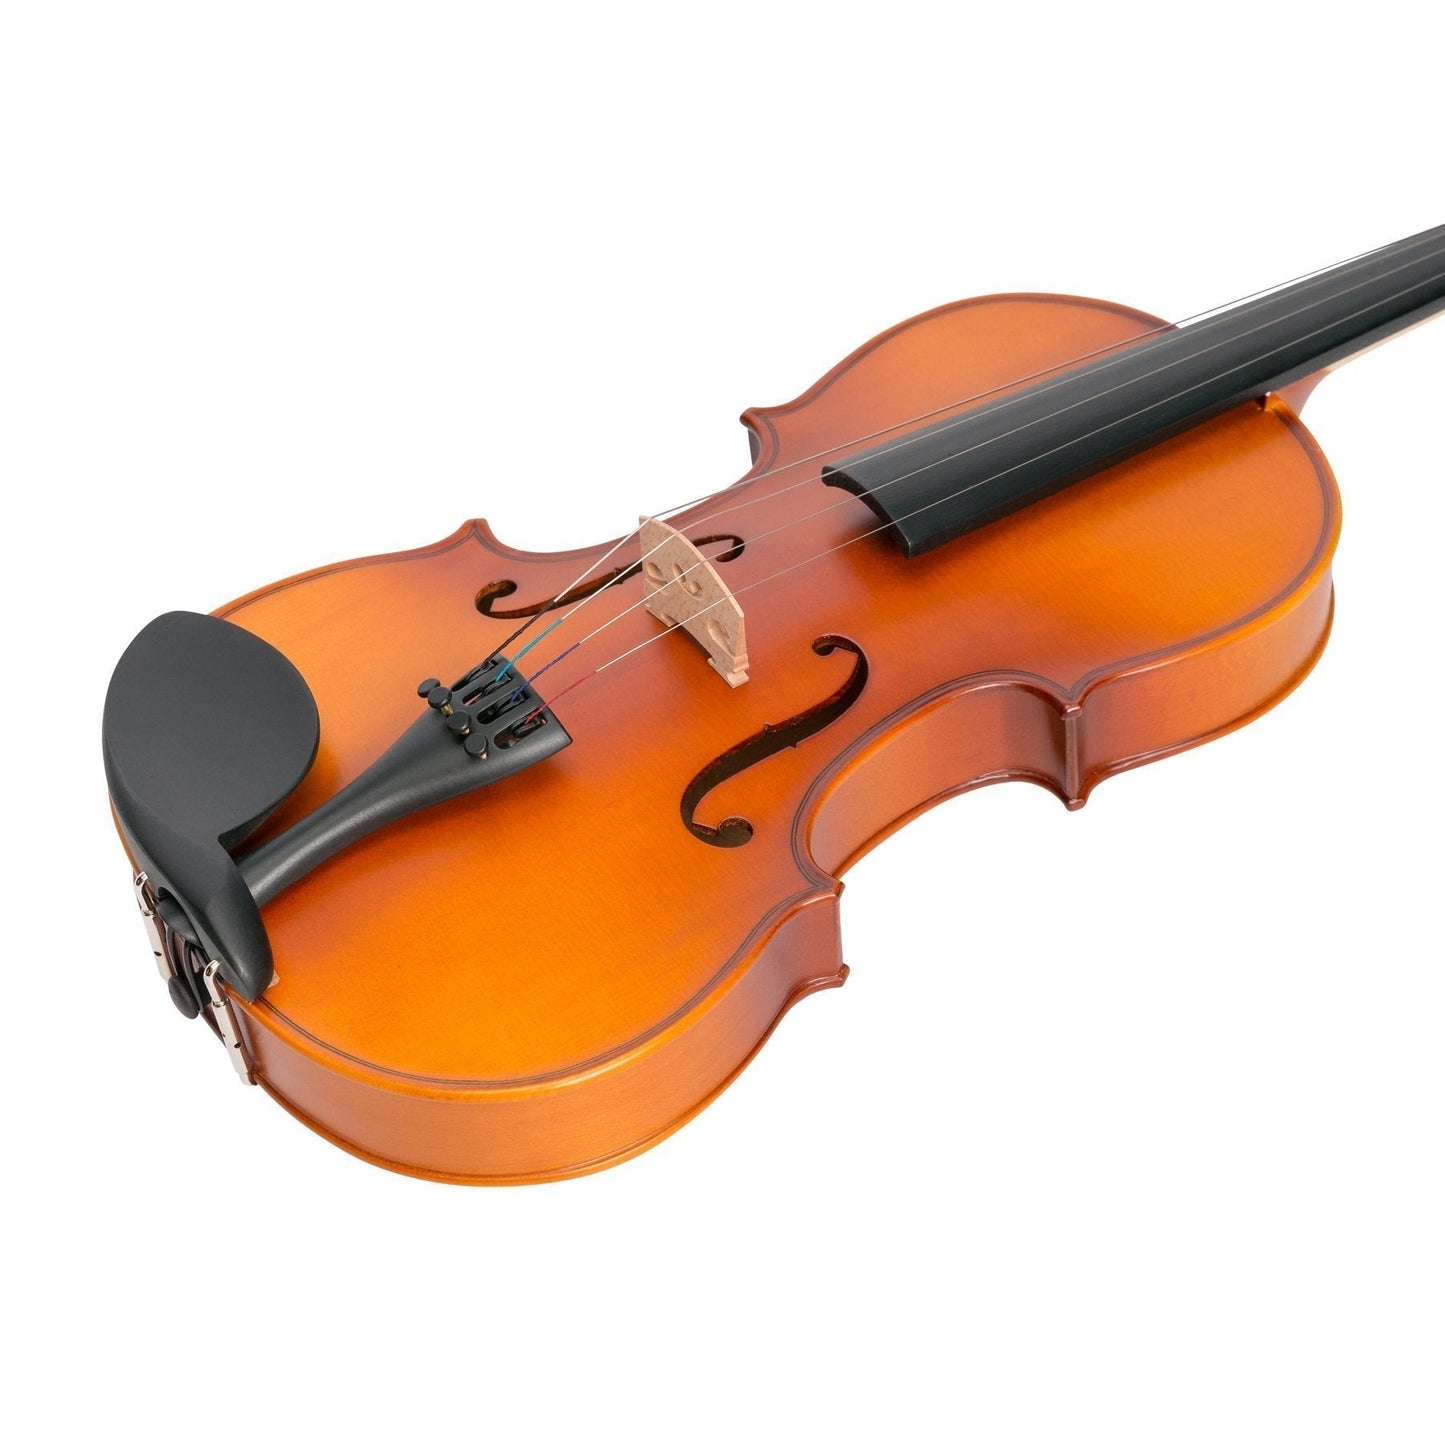 Load image into Gallery viewer, Steinhoff Full Size Student Solid Top Violin  Set (Natural Satin)
